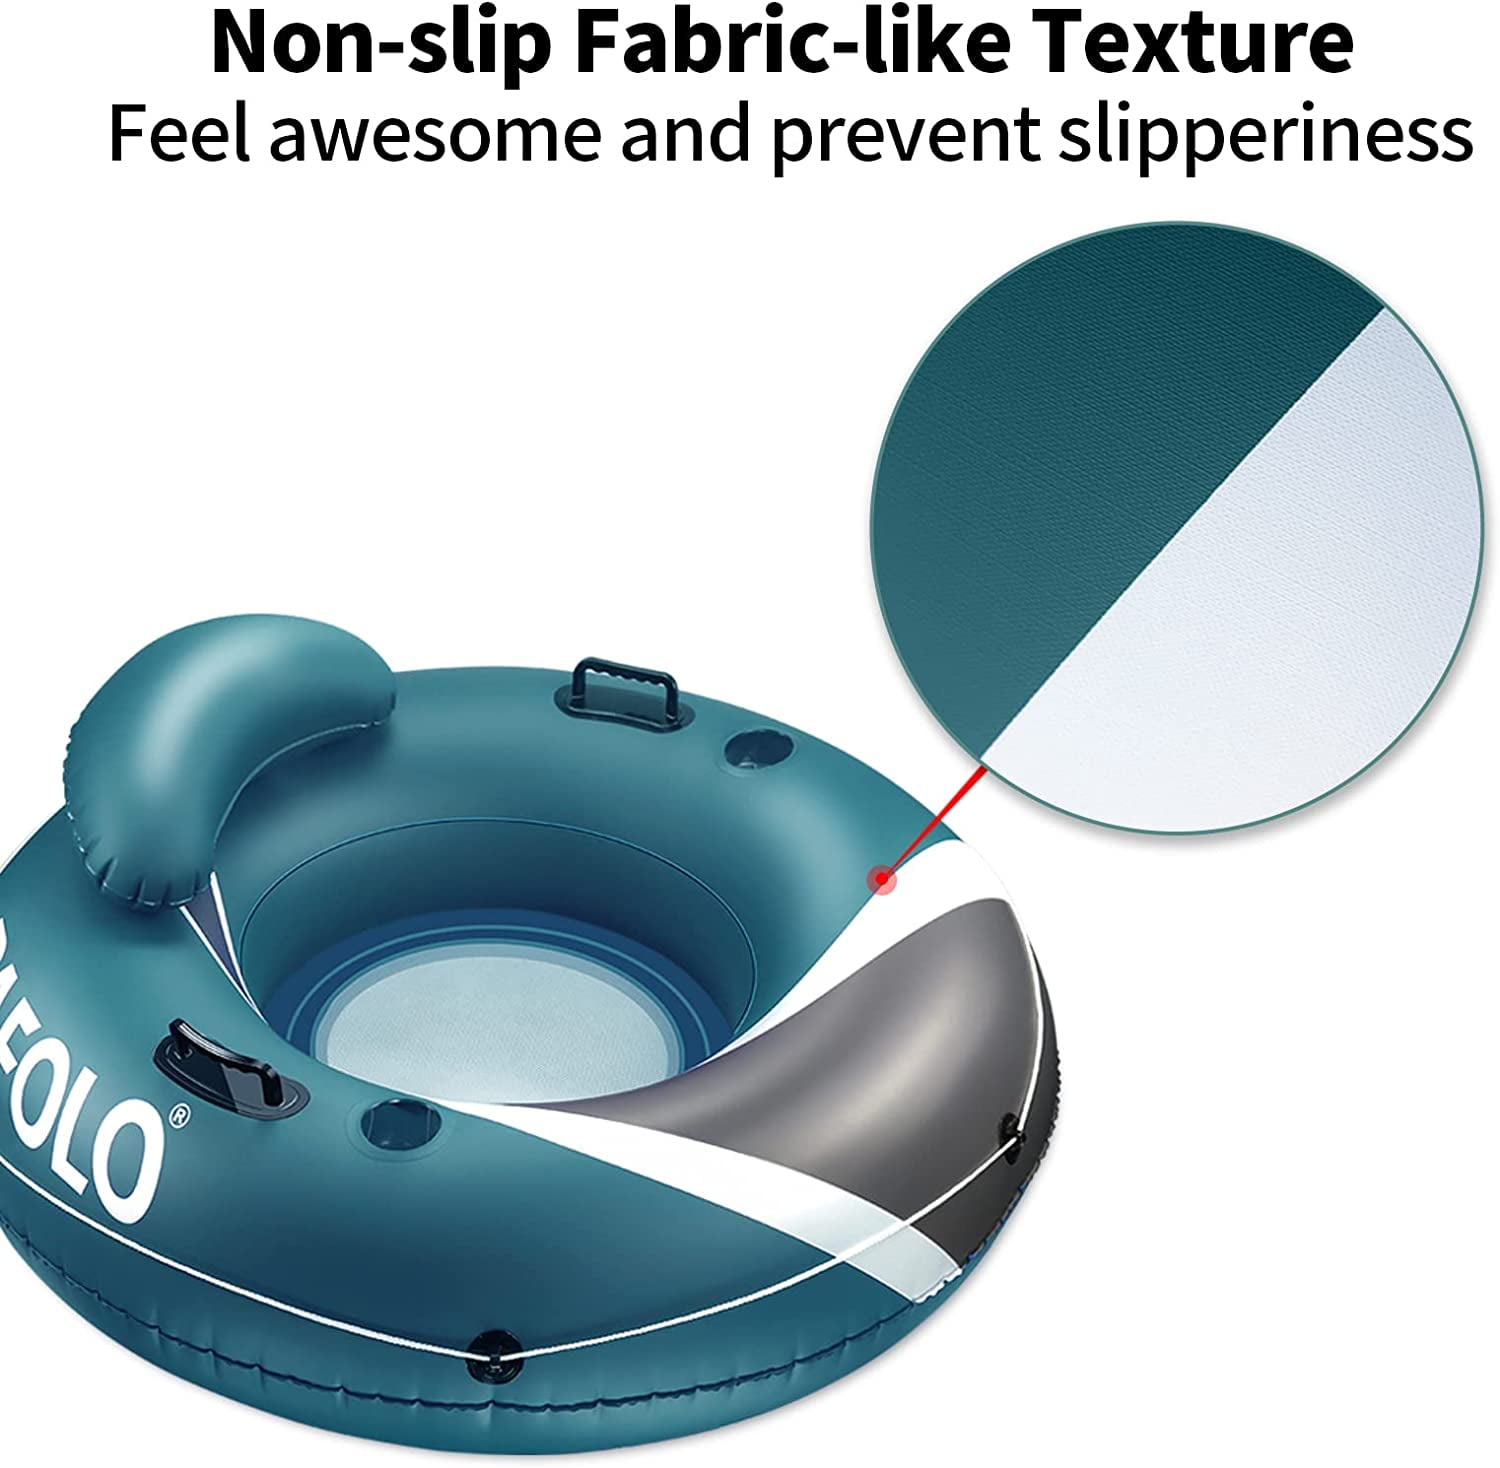 PAFOLO Pool Float Adult, River Tubes for Floating Heavy Duty, River Floats  with Mesh Bottom, 2 Cup Holders, 2 Heavy-Duty Handles, Headrest, 53